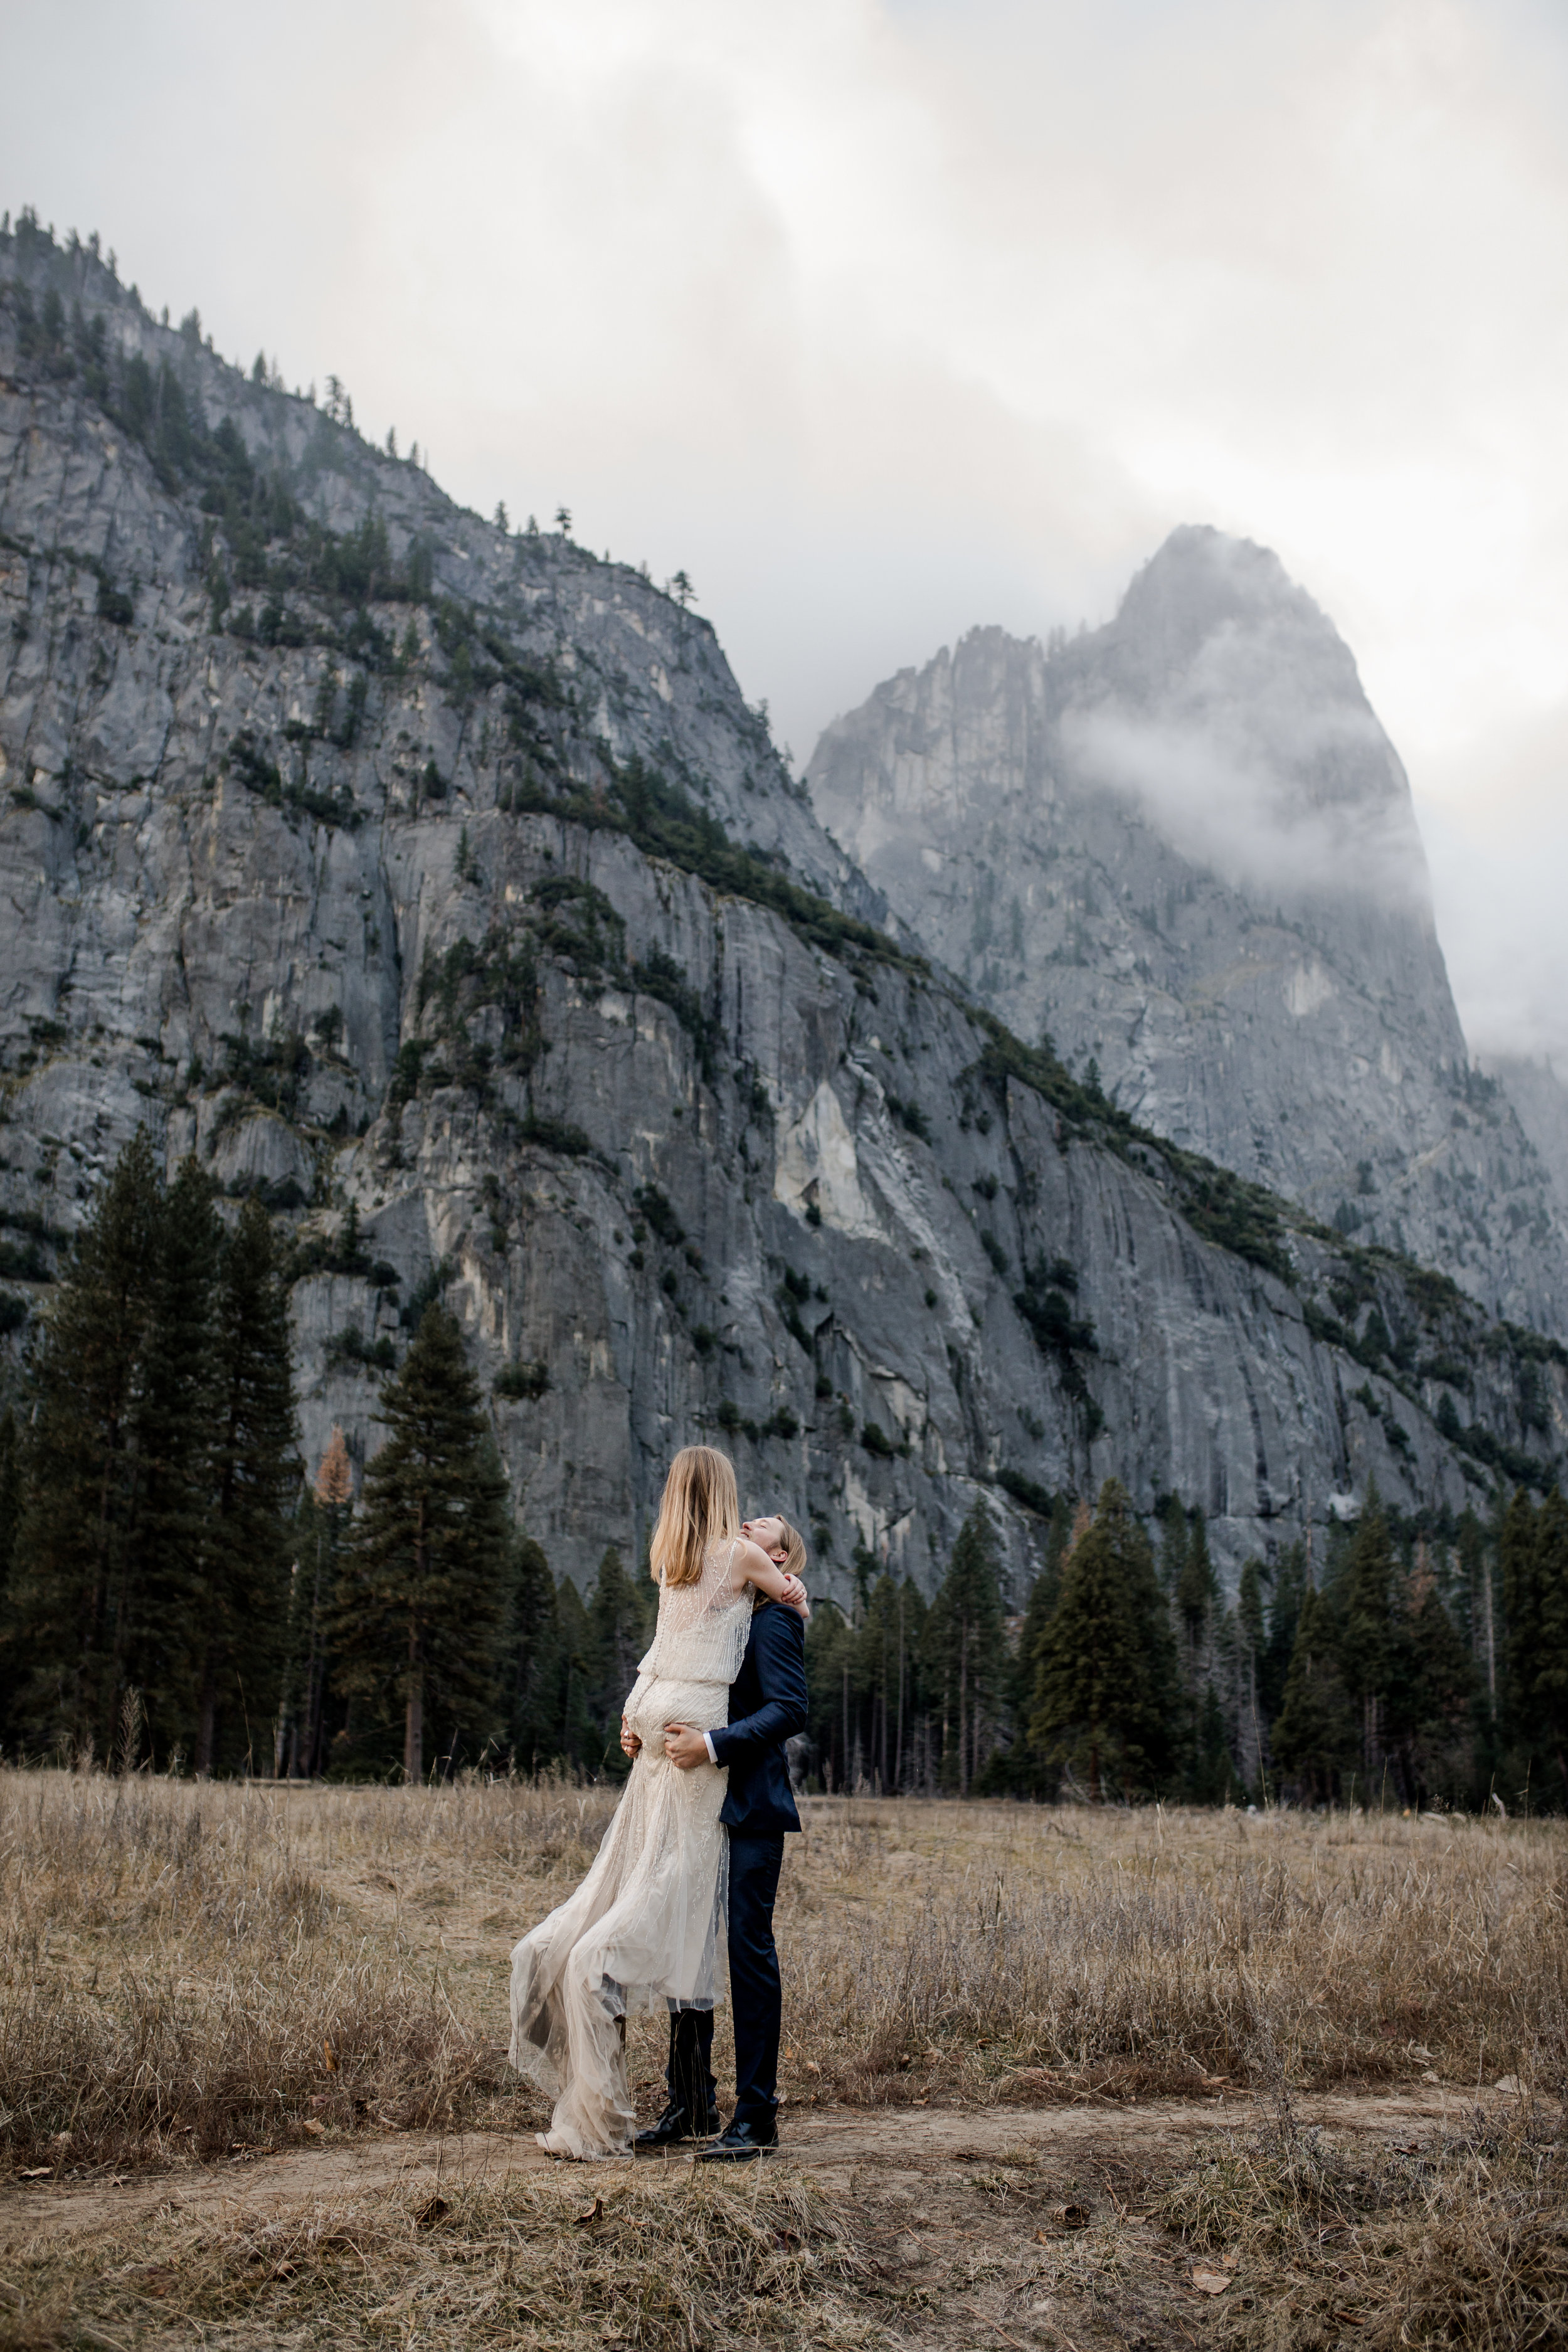 nicole-daacke-photography-yousemite-national-park-elopement-photographer-winter-cloud-moody-elope-inspiration-yosemite-valley-tunnel-view-winter-cloud-fog-weather-wedding-photos-65.jpg